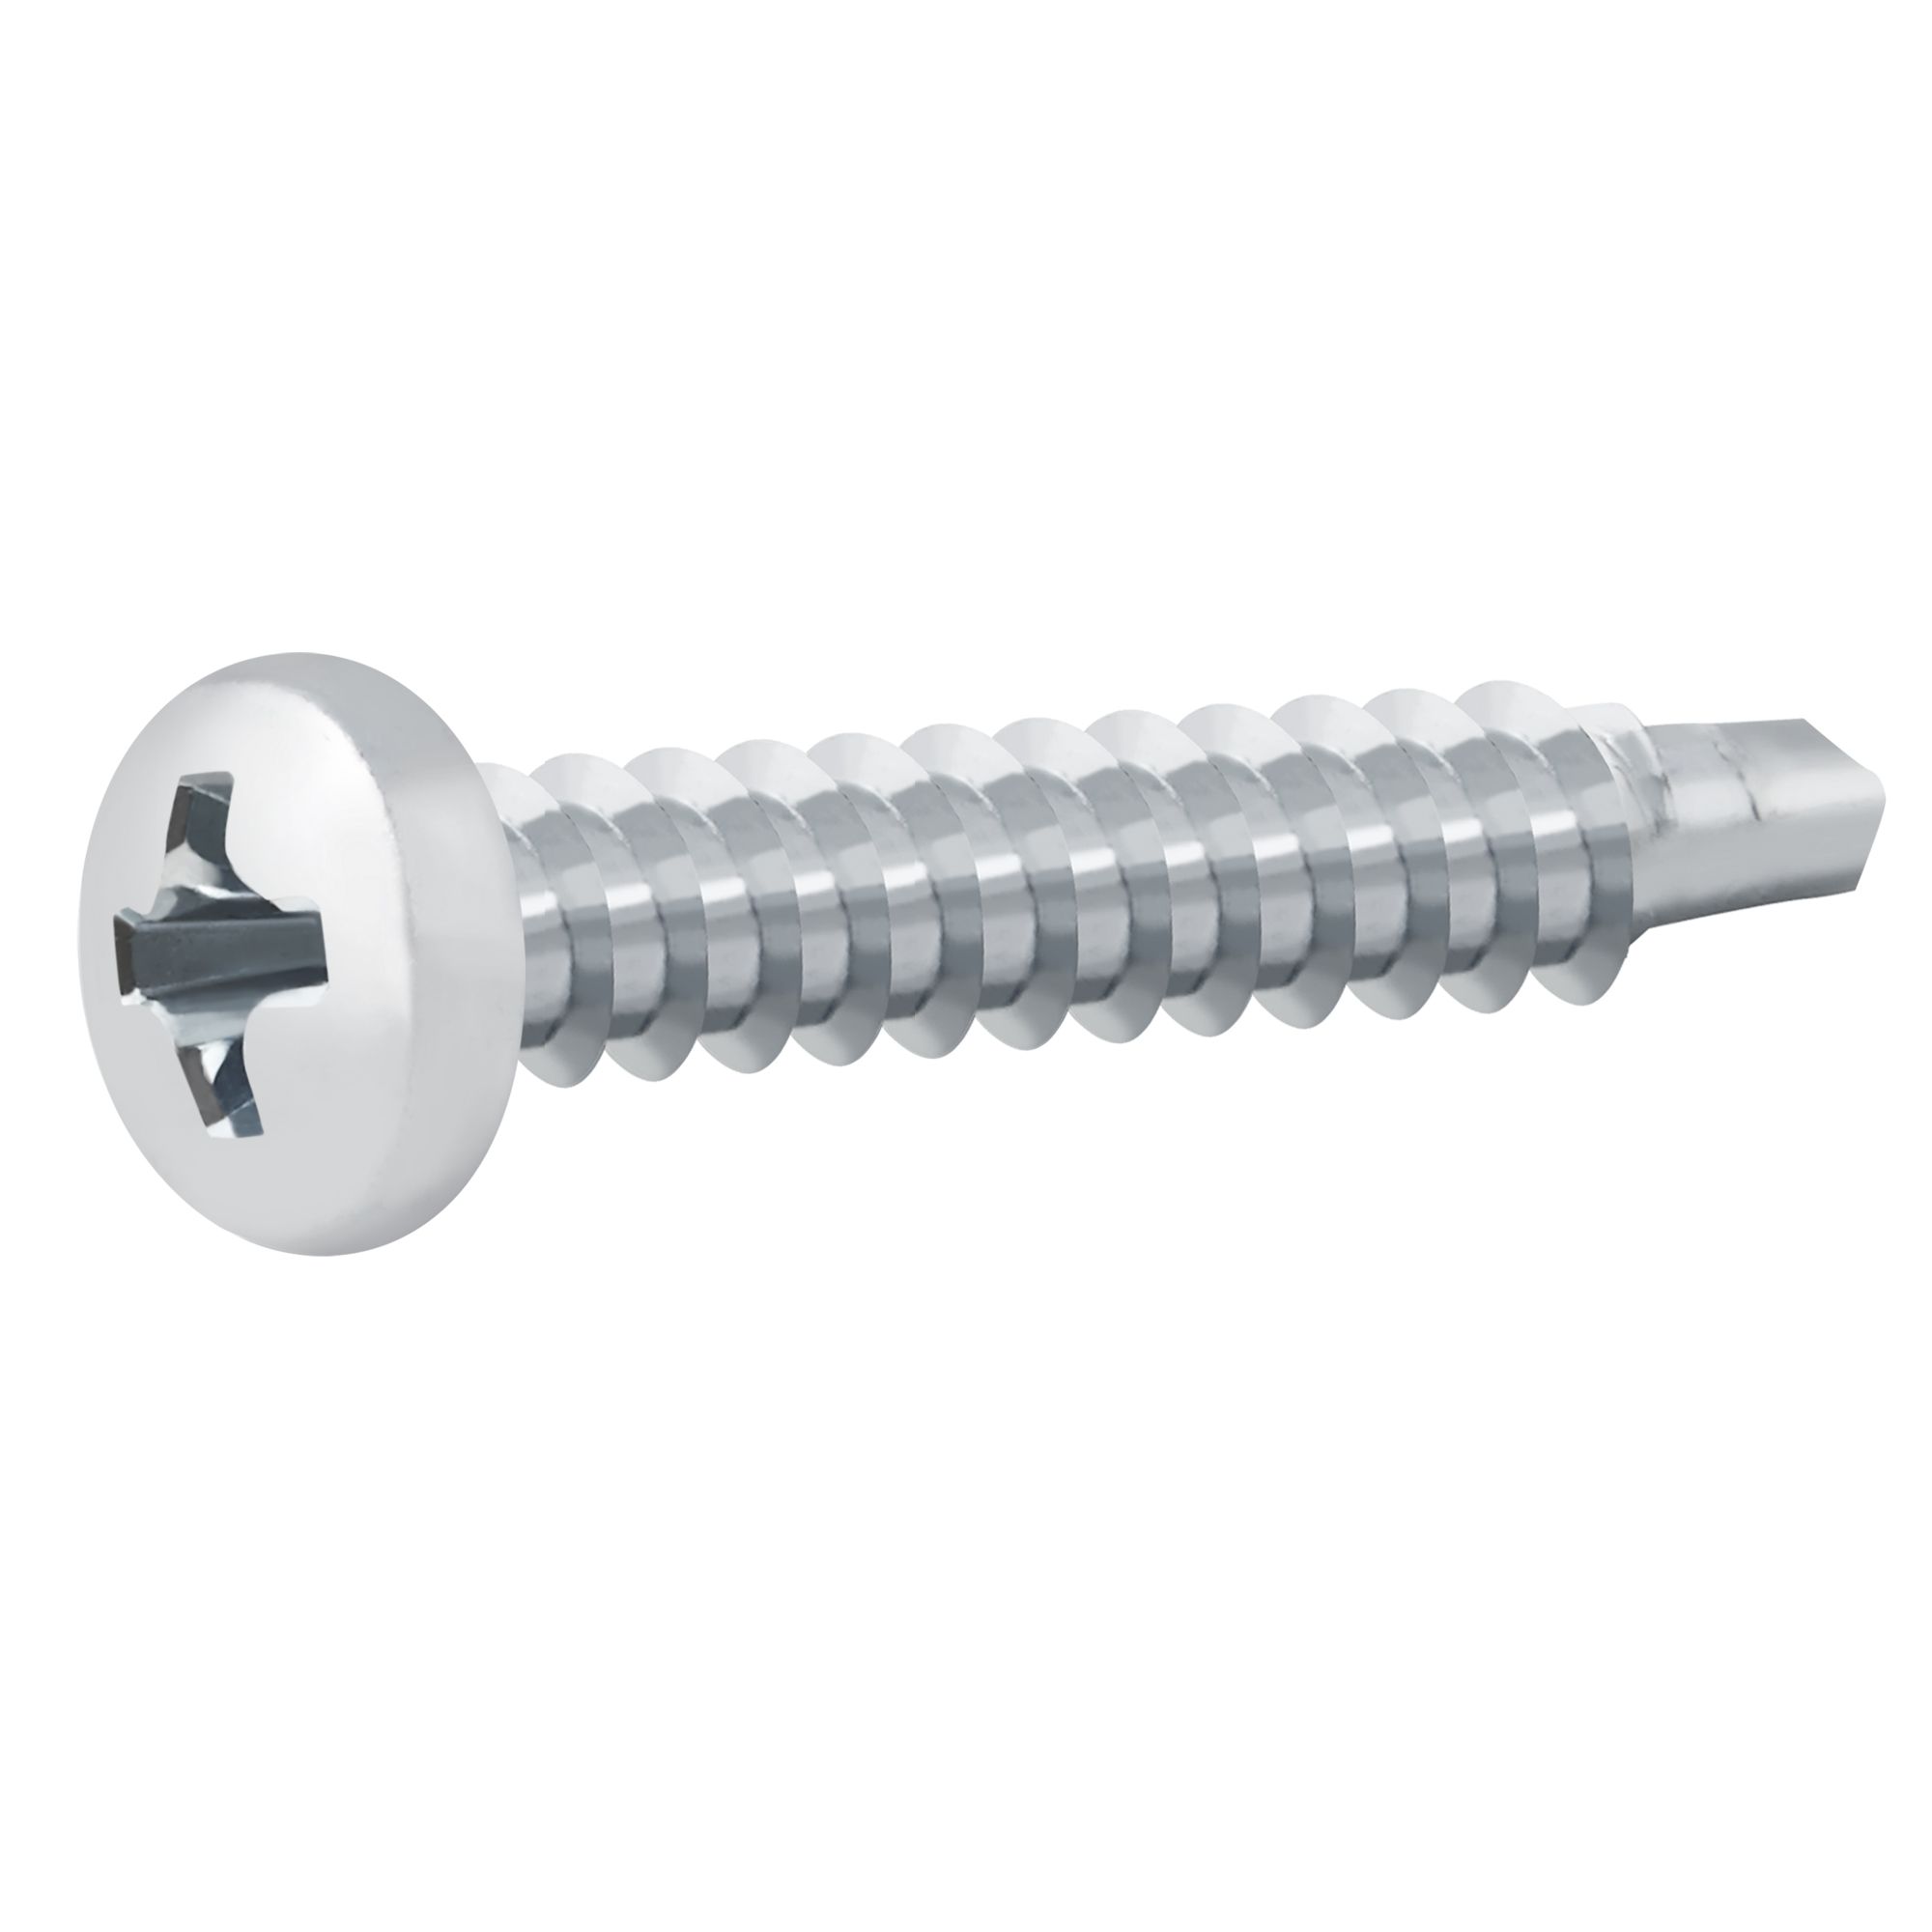 Diall Phillips Pan head Zinc-plated Carbon steel (C1022) Self-drilling screw (Dia)4.2mm (L)25mm, Pack of 25